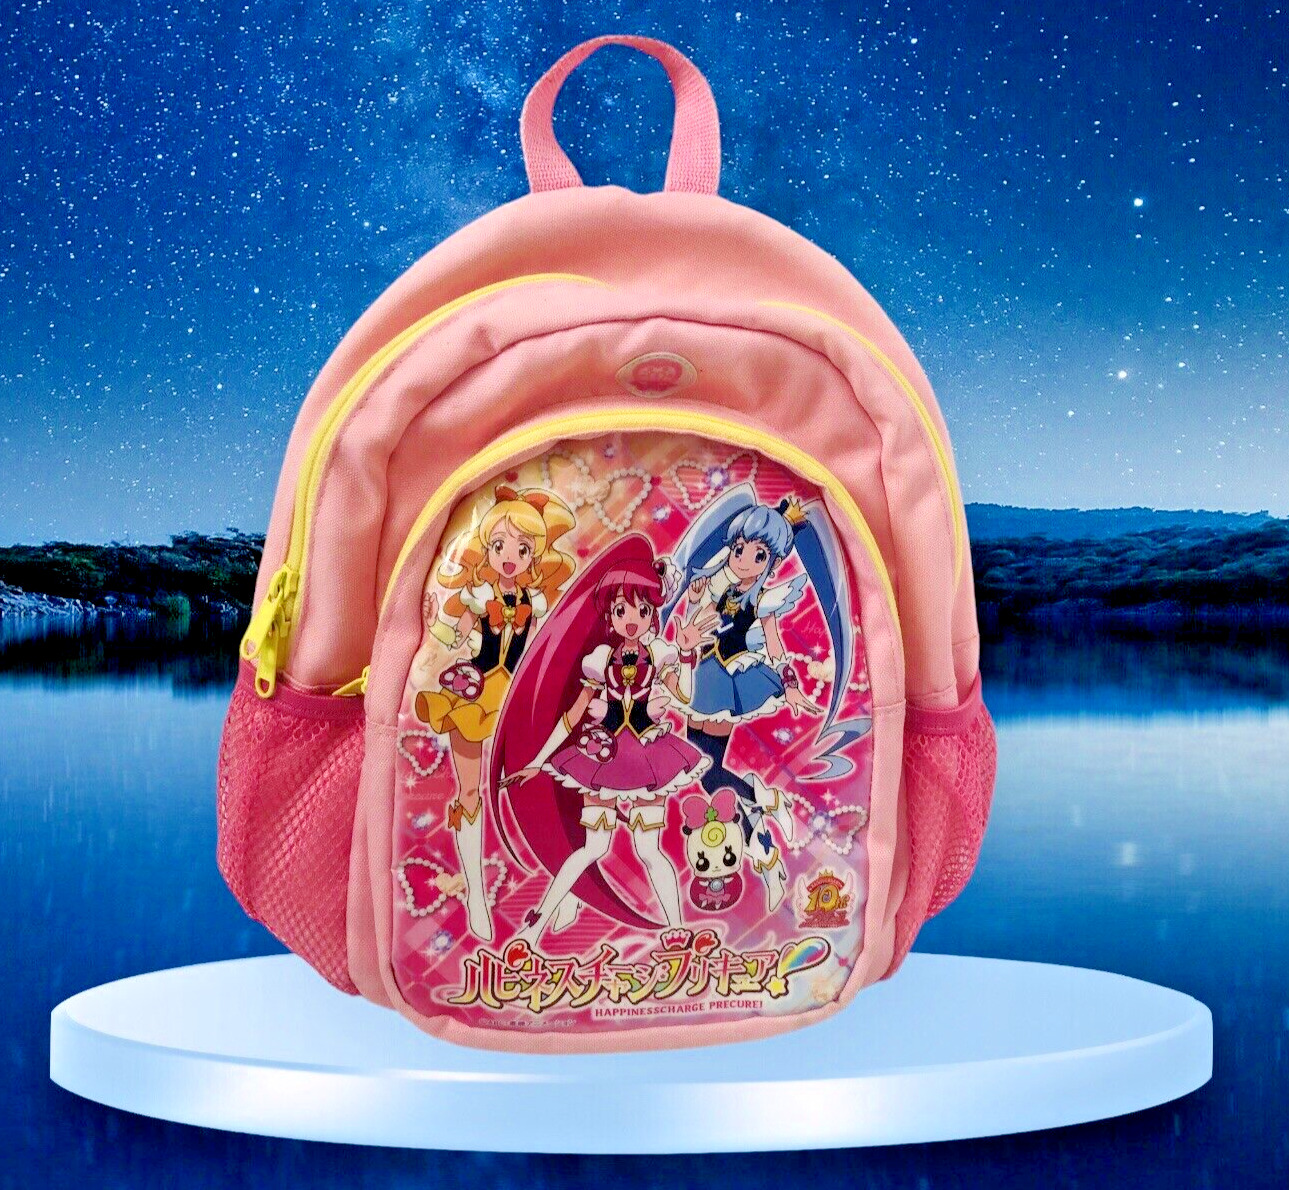 Happinesscharge Precure Backpack Approx 13 x 10 inches